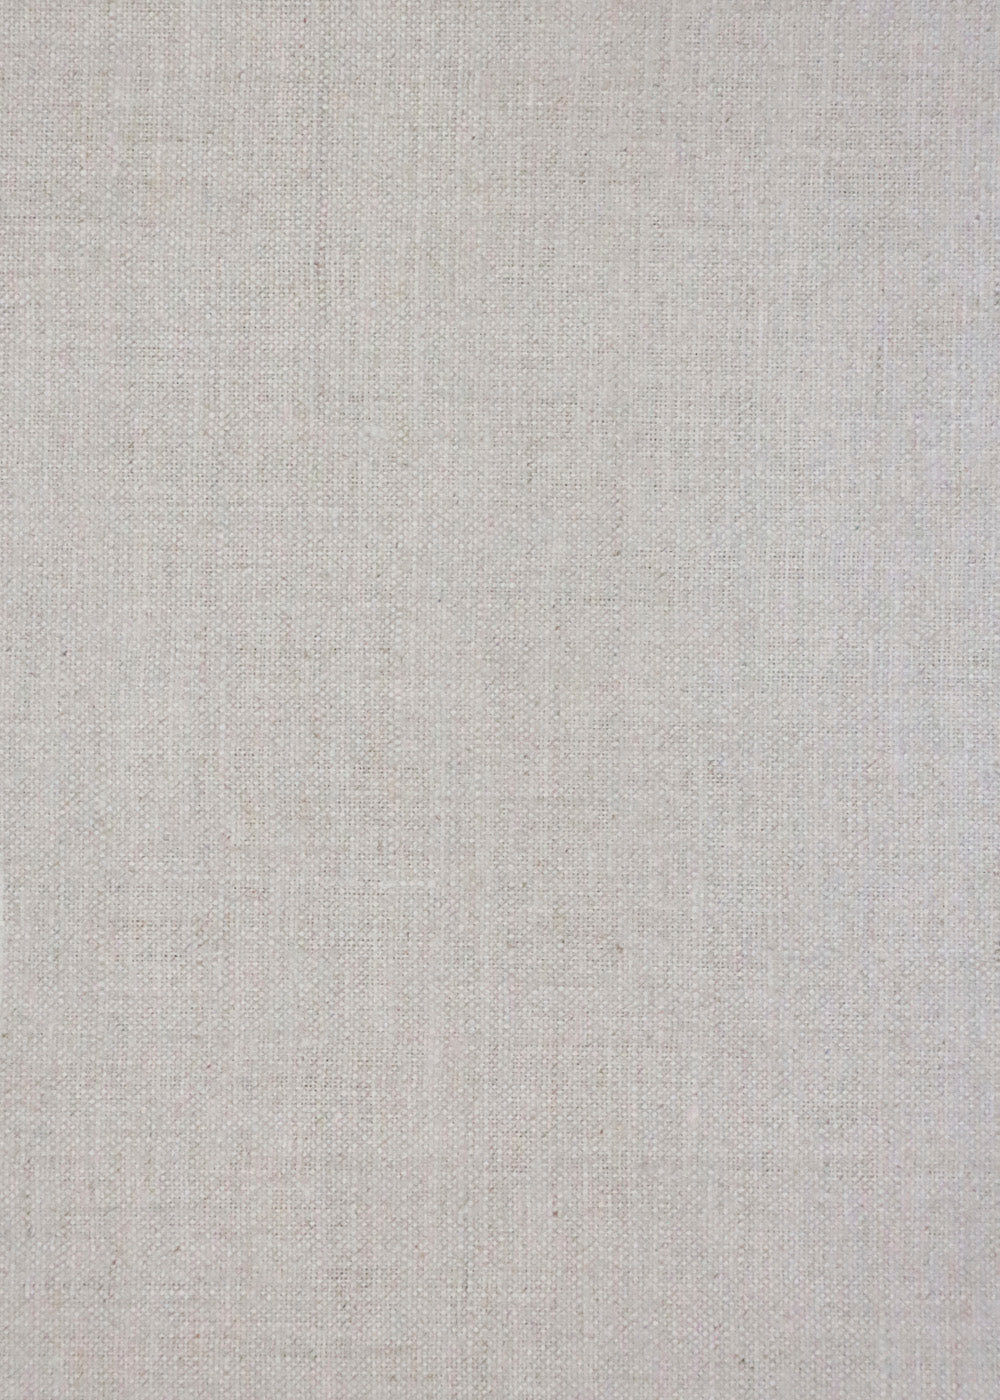 oatmeal linen fabric with a glazed finish